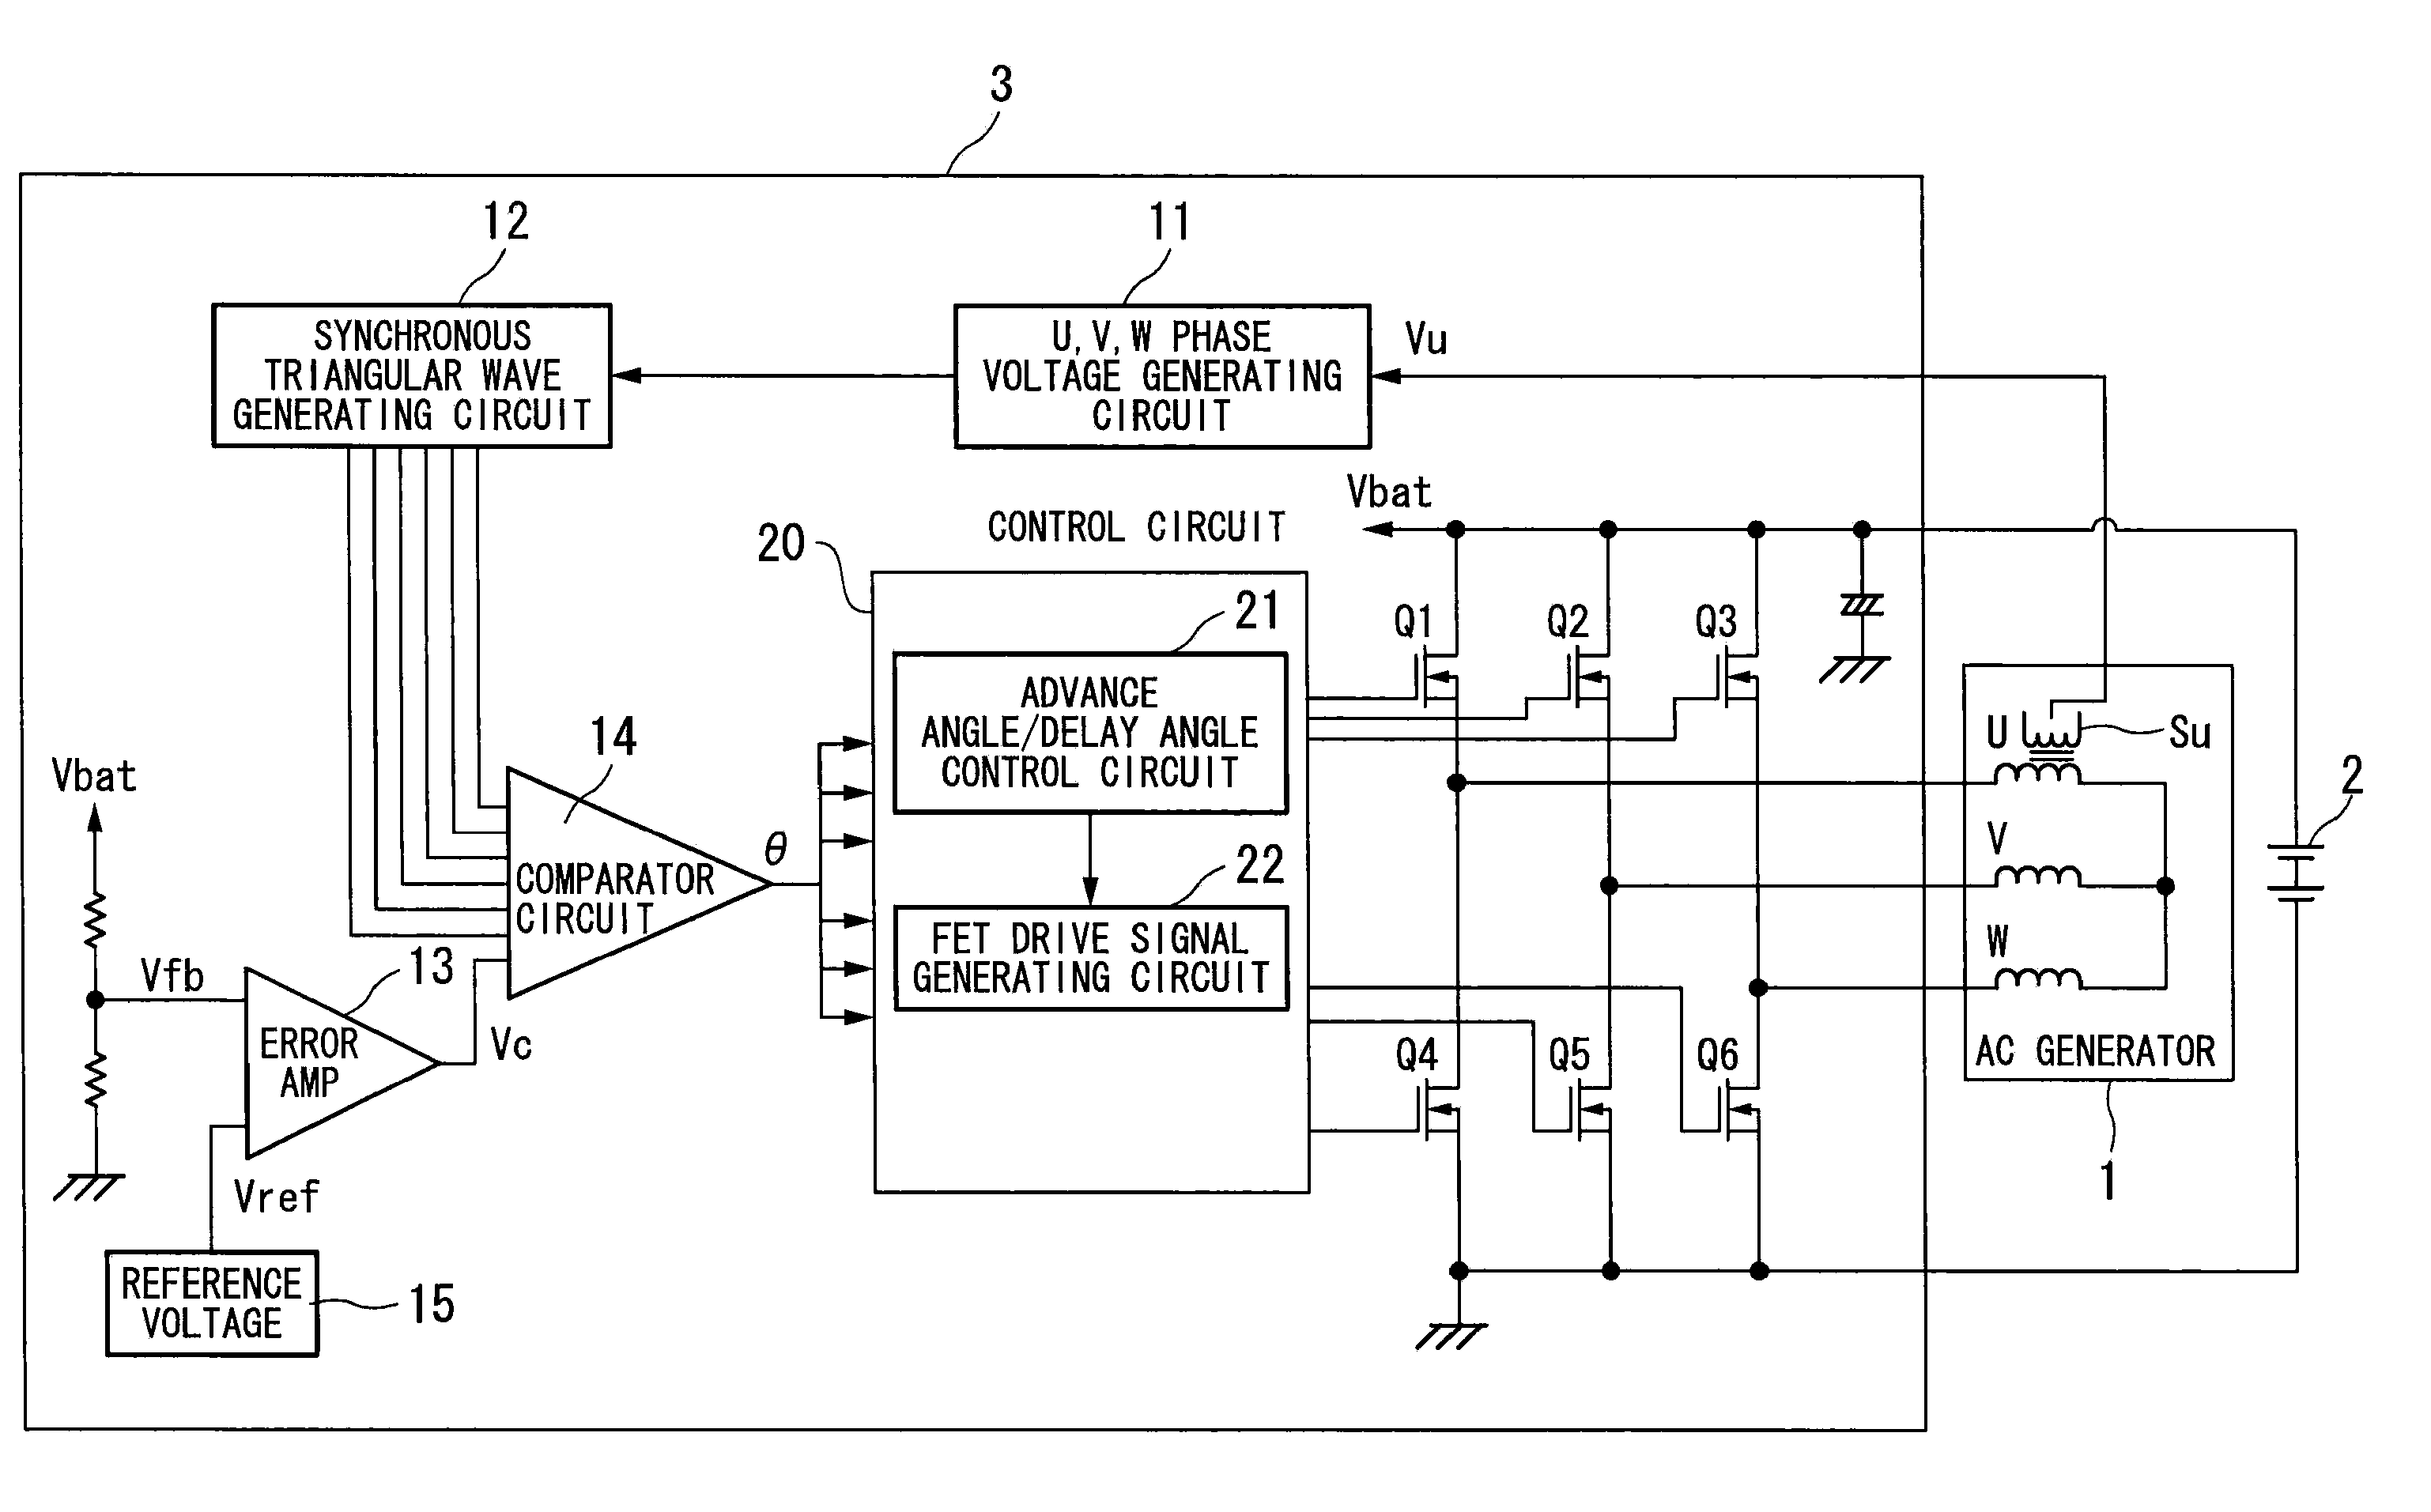 Battery charging device, three-phase voltage generating circuit, three-phase voltage generation method and delay angle control method